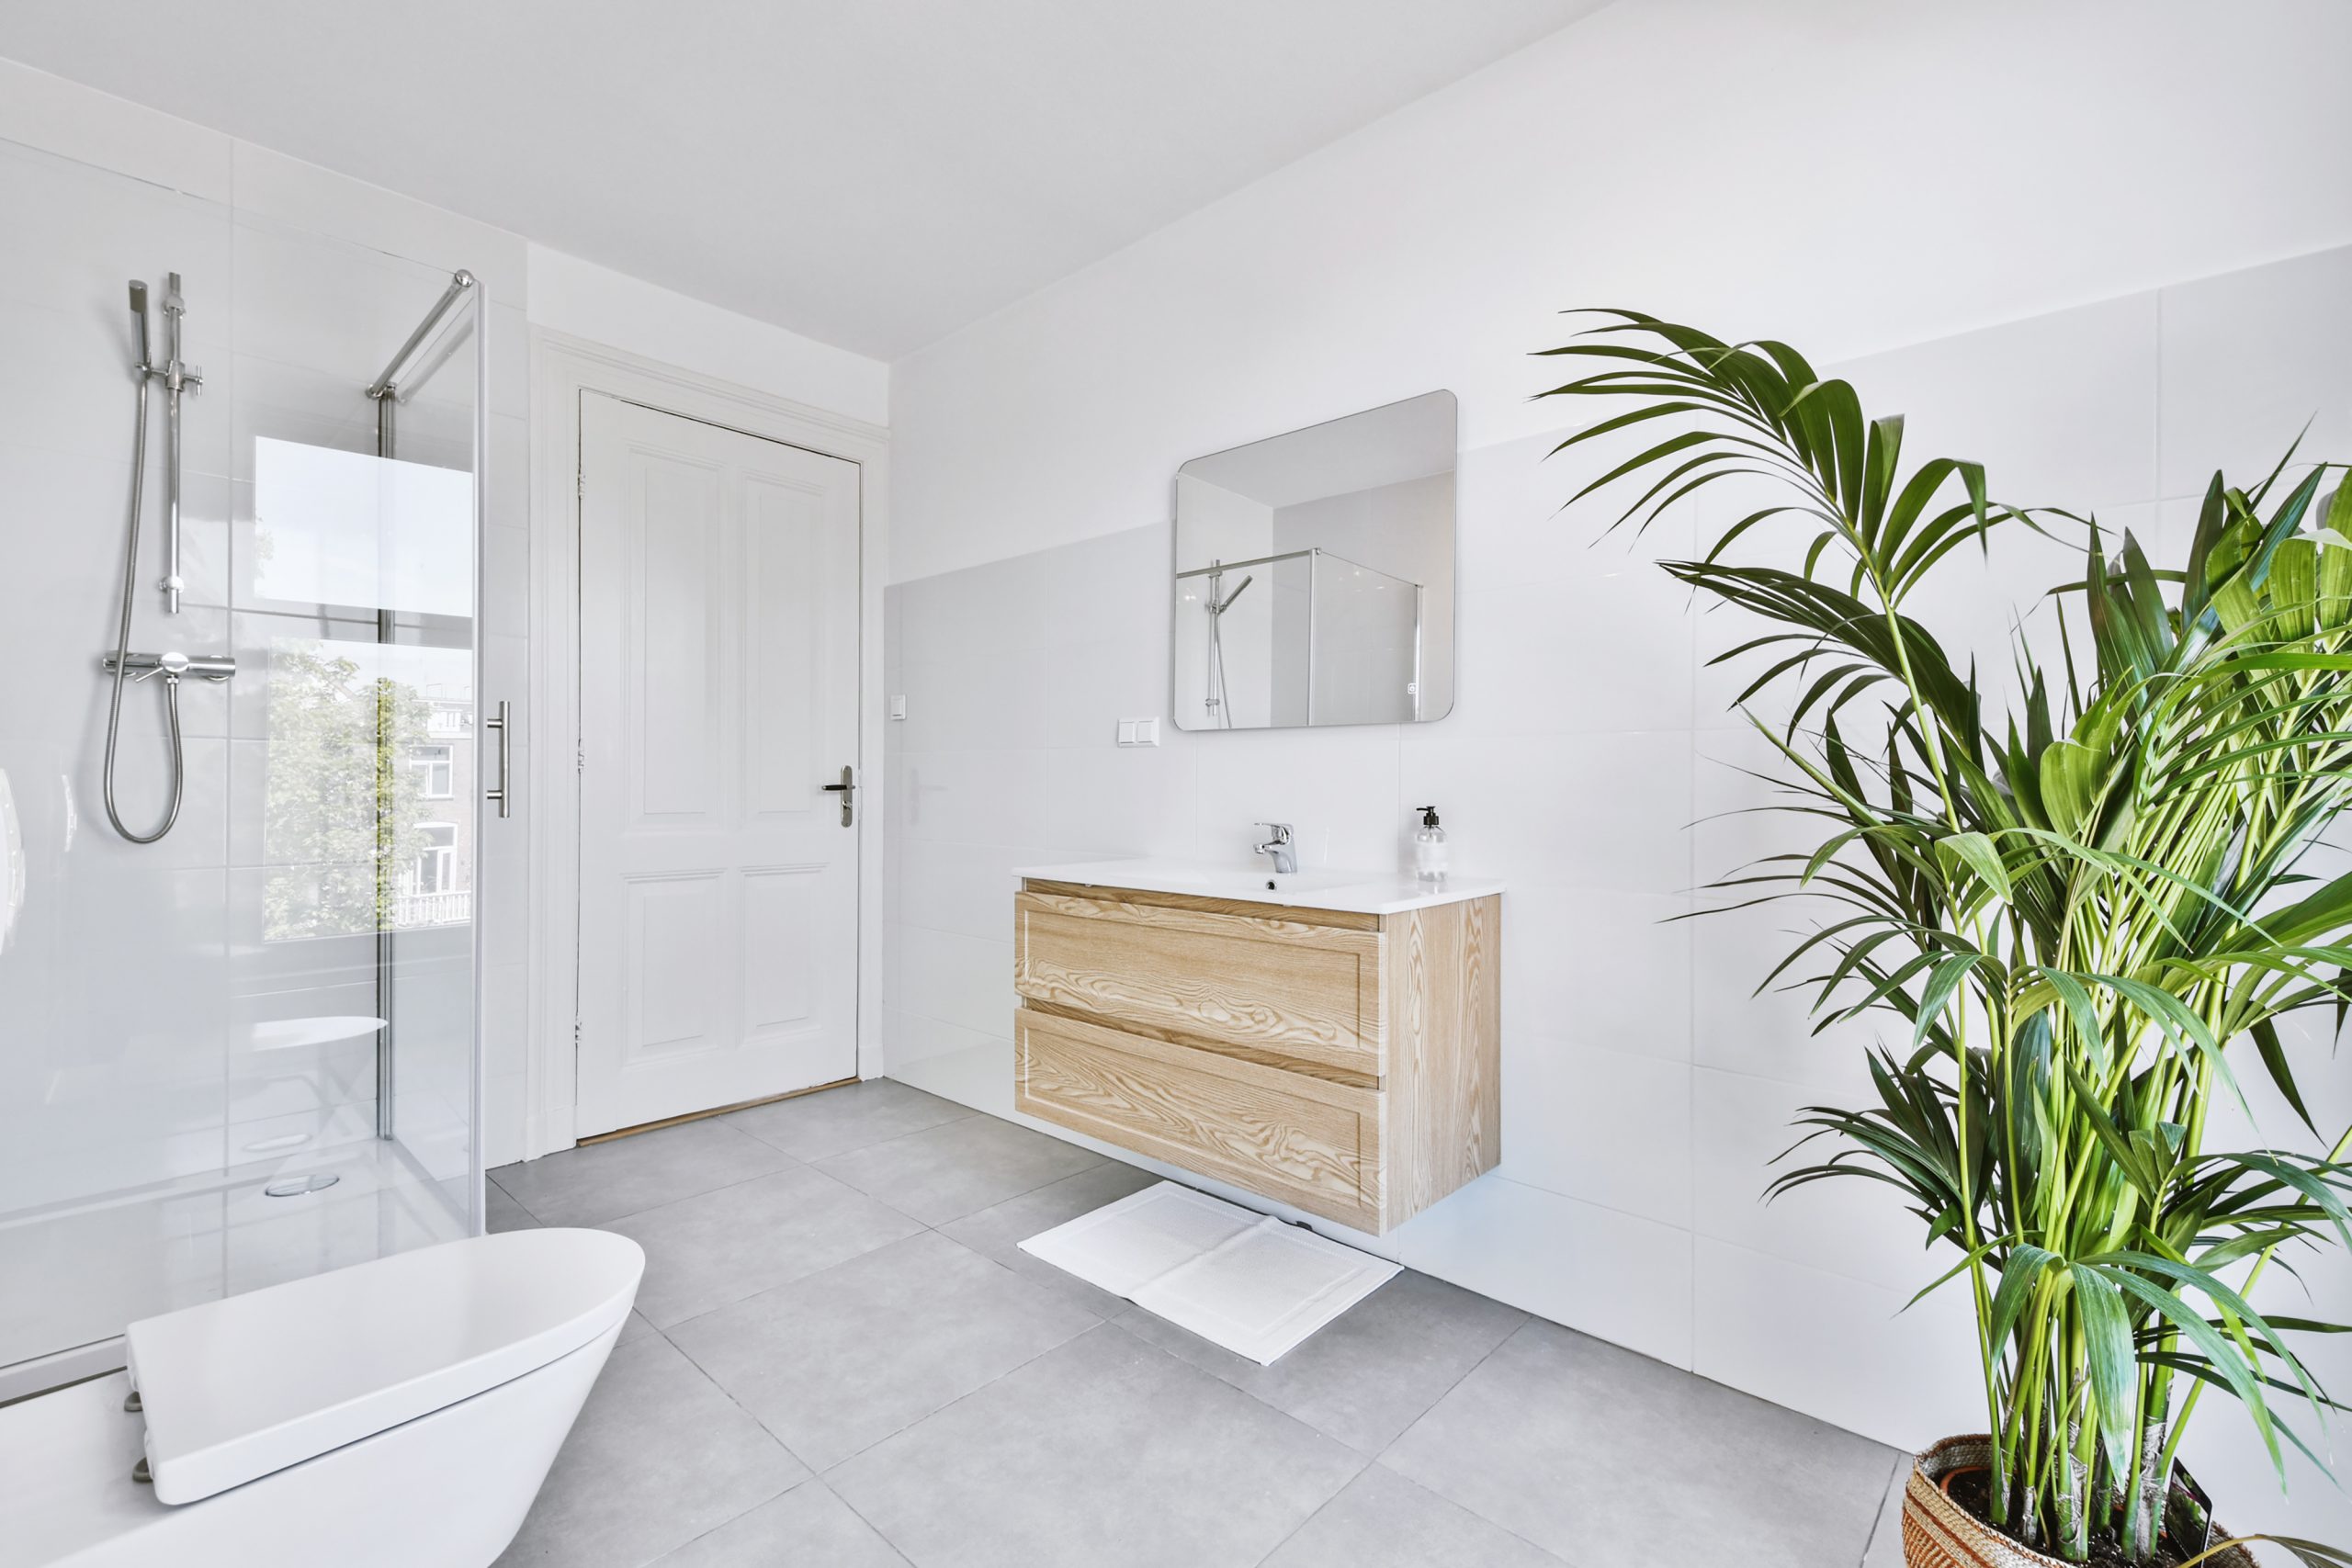 Interior of bathroom with plant